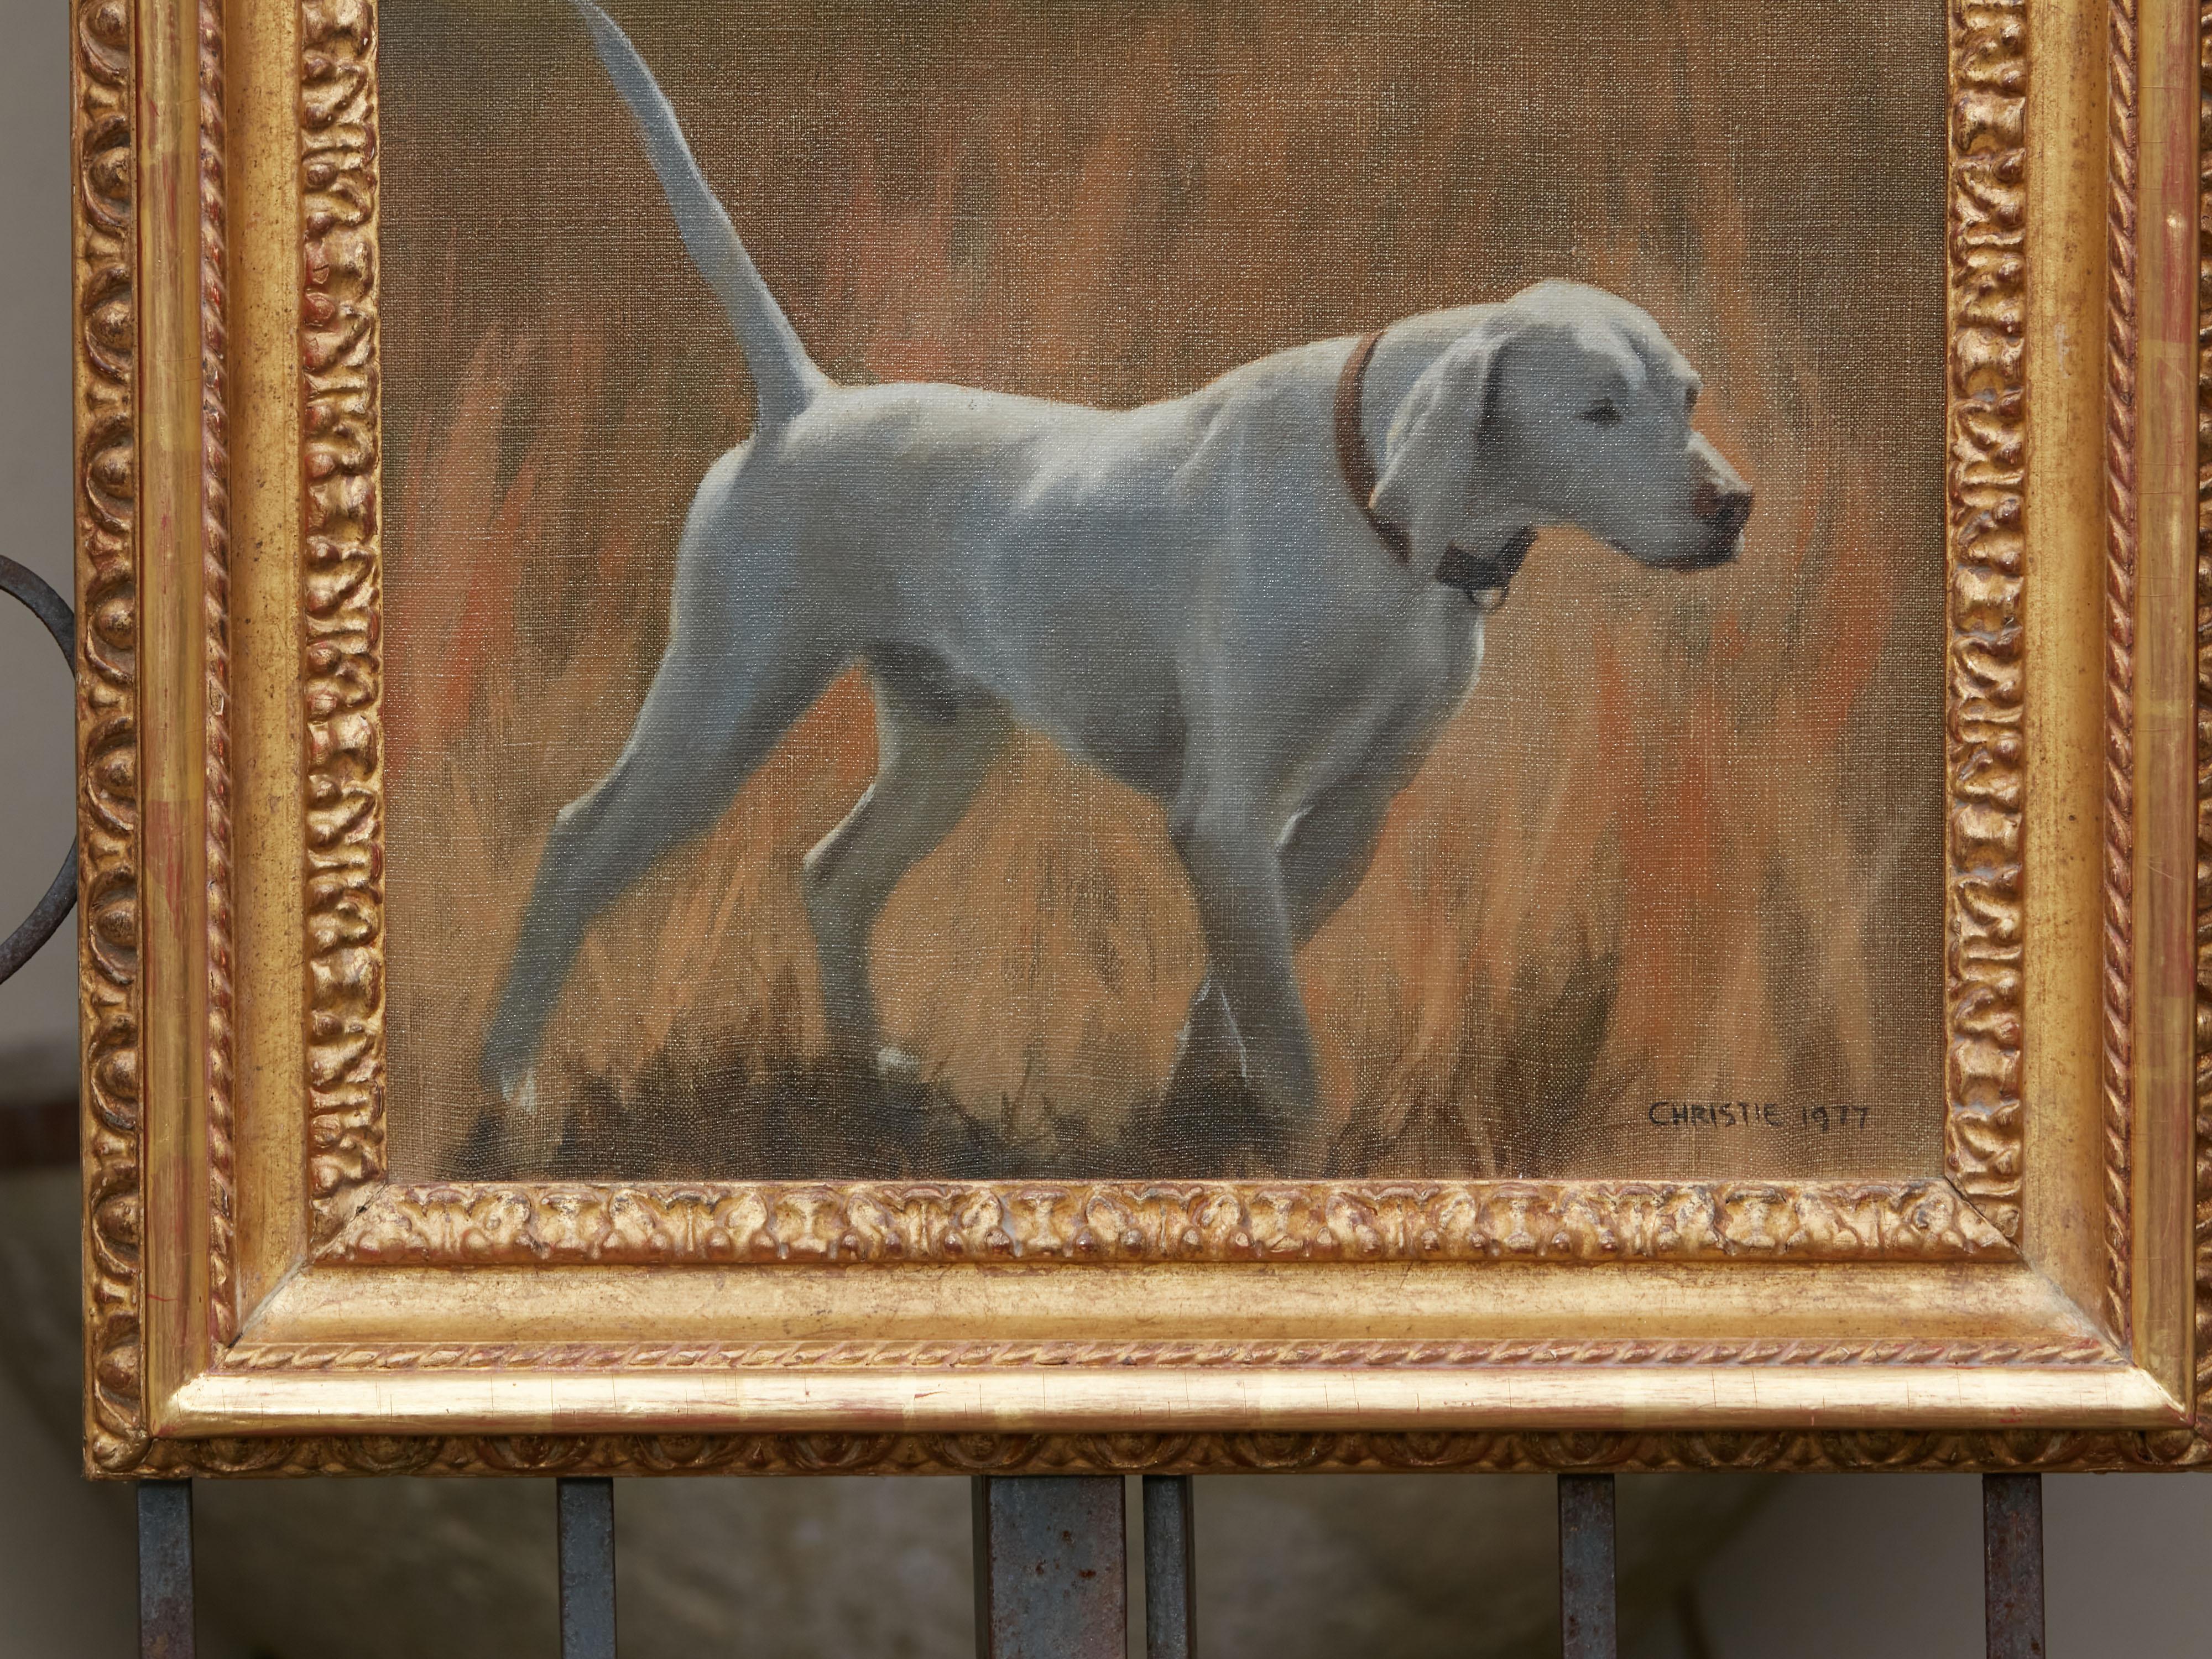 Oil on Canvas Painting of a Sporting Dog in Giltwood Frame, Signed Christie 1